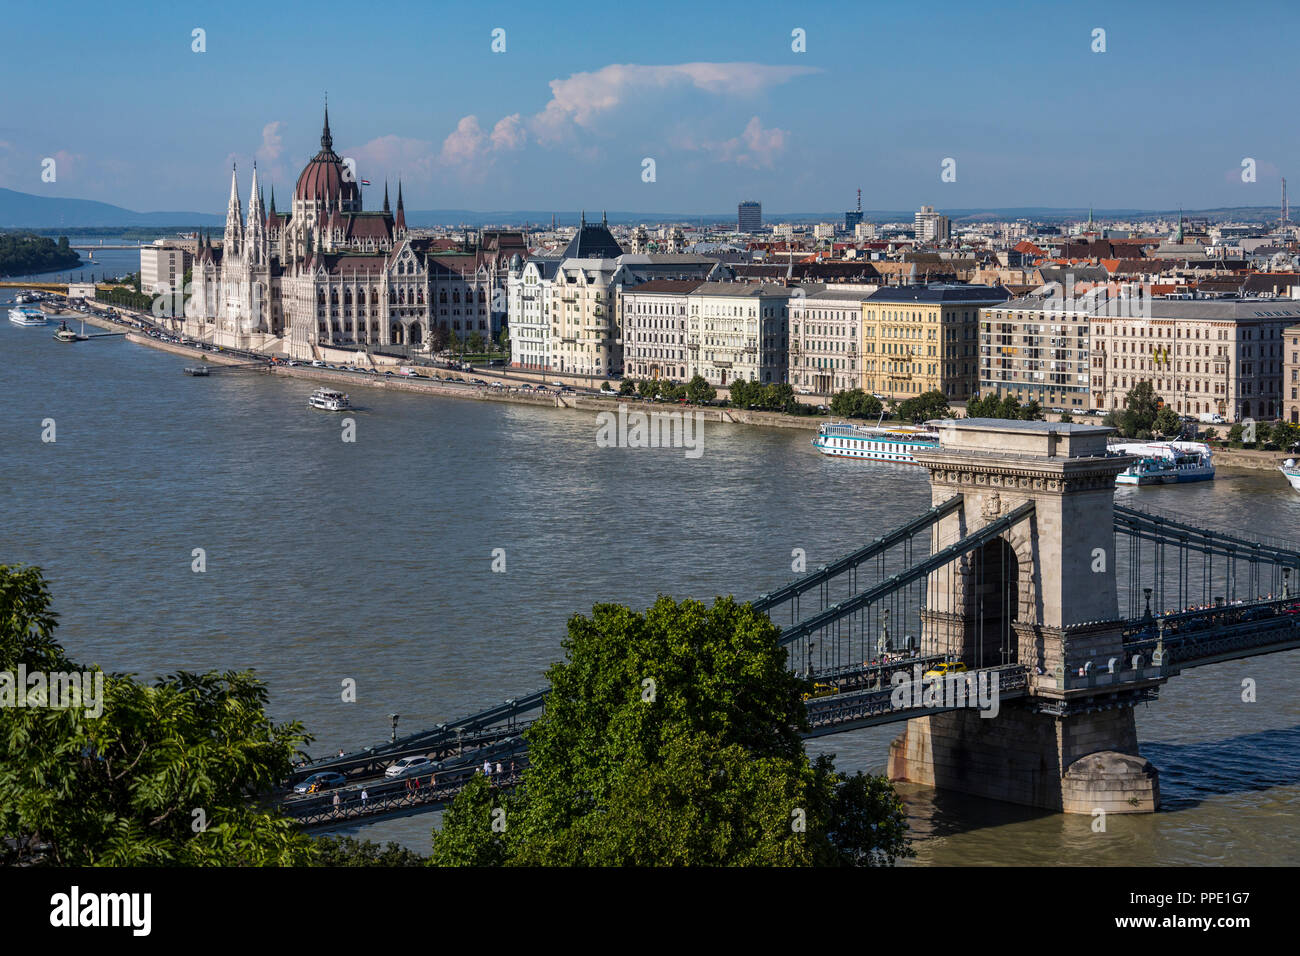 Budapest, Hungary. View over the city including the landmarks of the Hungarian Parliament Building and the Szechenyi Chain Bridge. Stock Photo